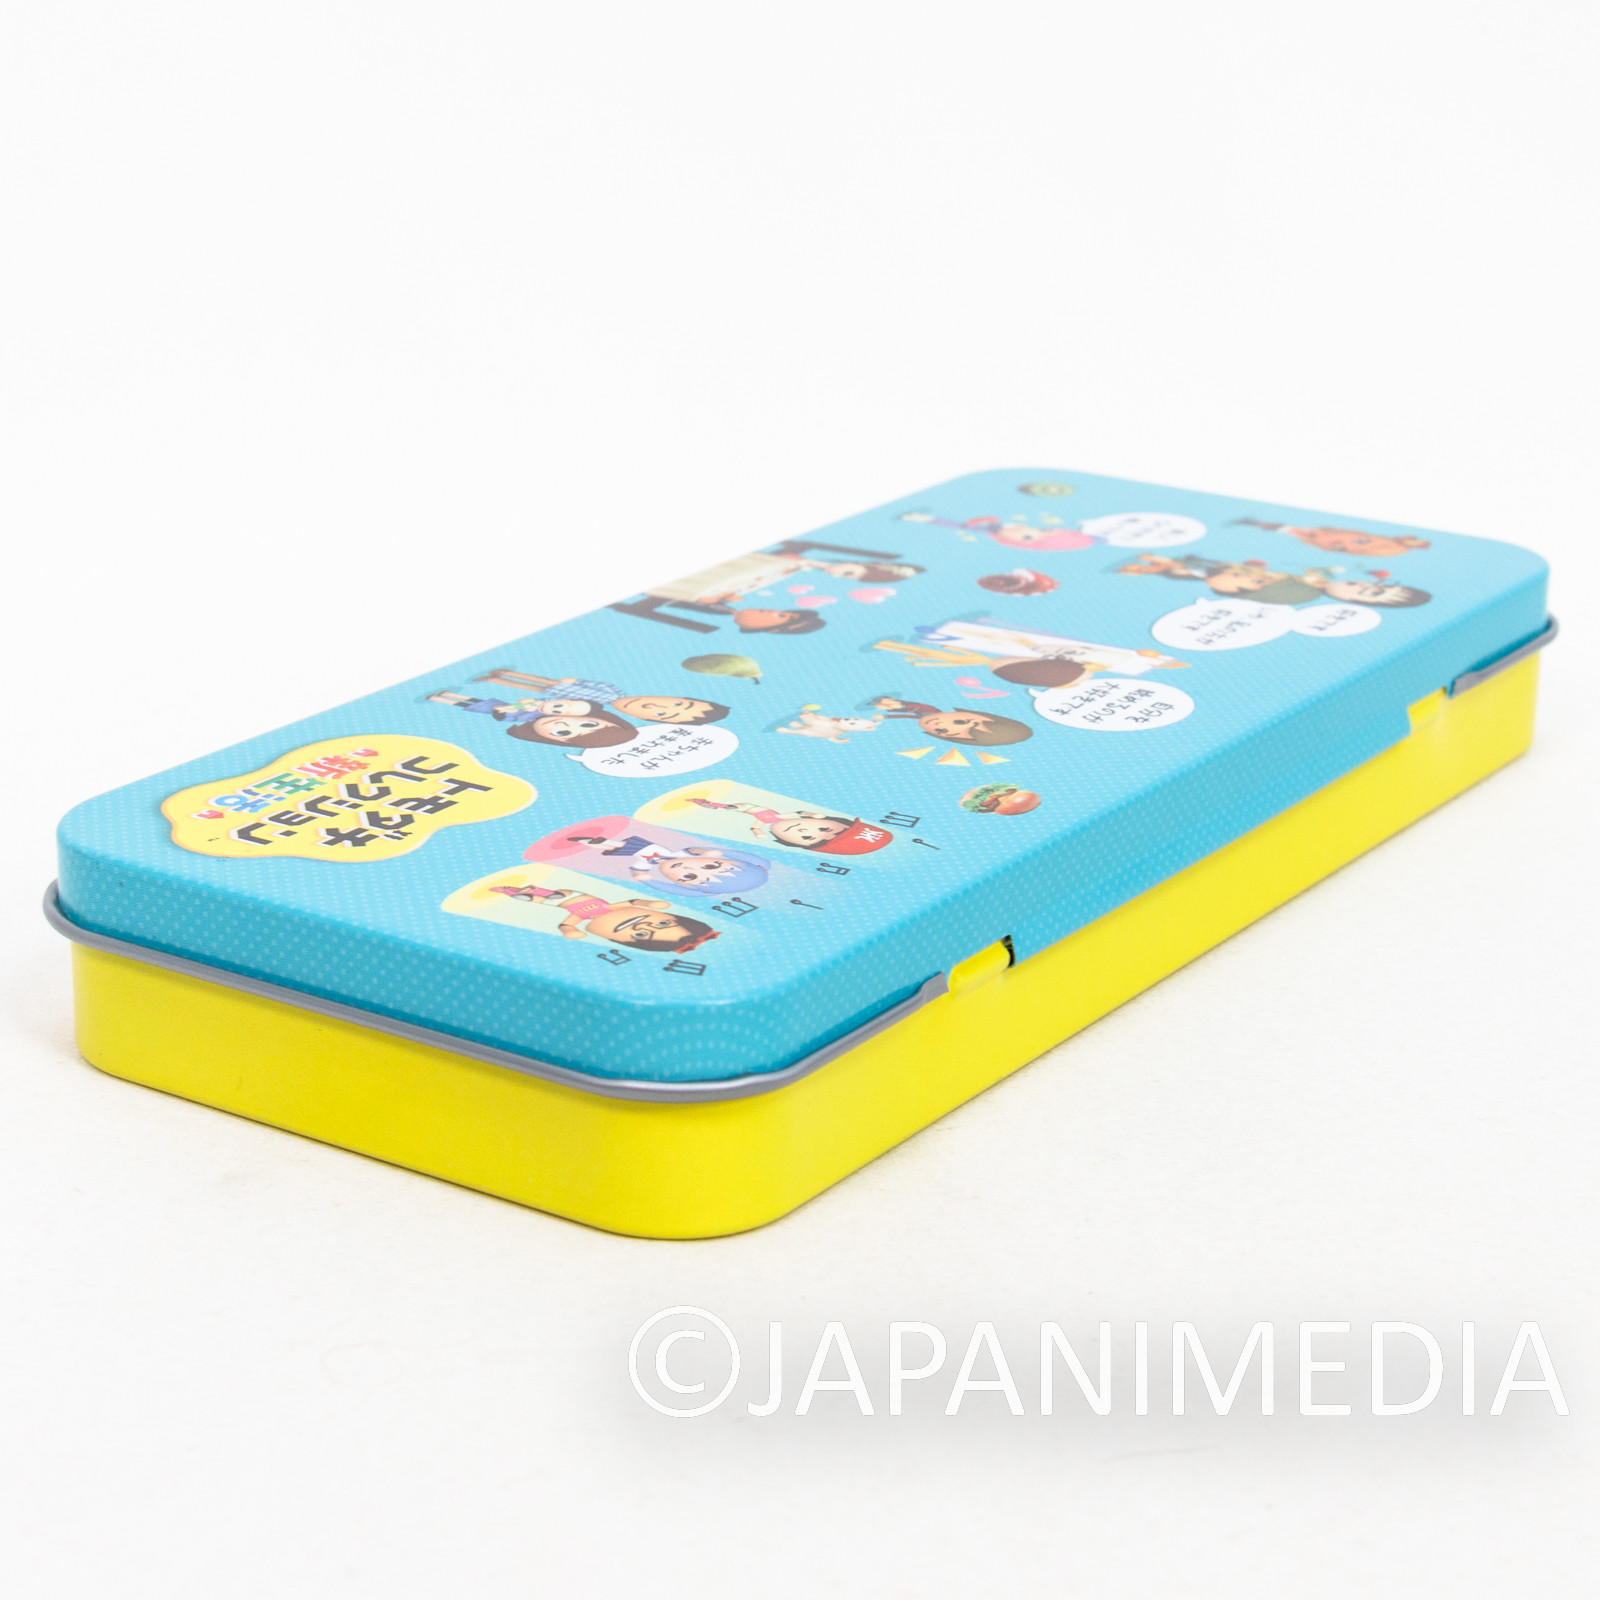 Tomodachi Collection Life Can Pen Case Nintendo DS Collection JAPAN